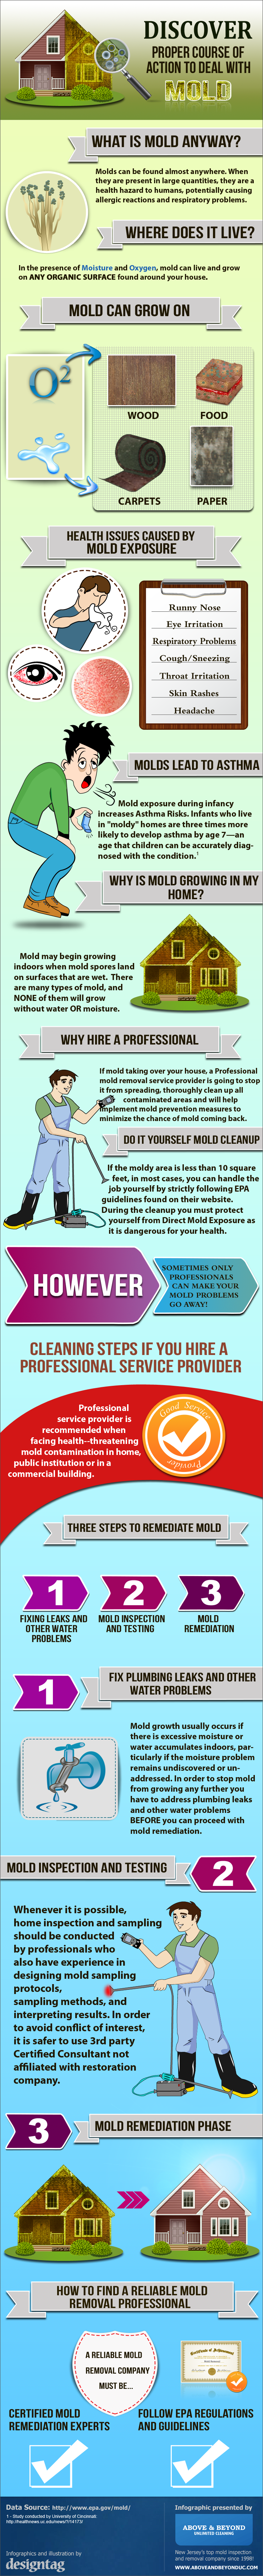 How to deal with household mold - Infographic